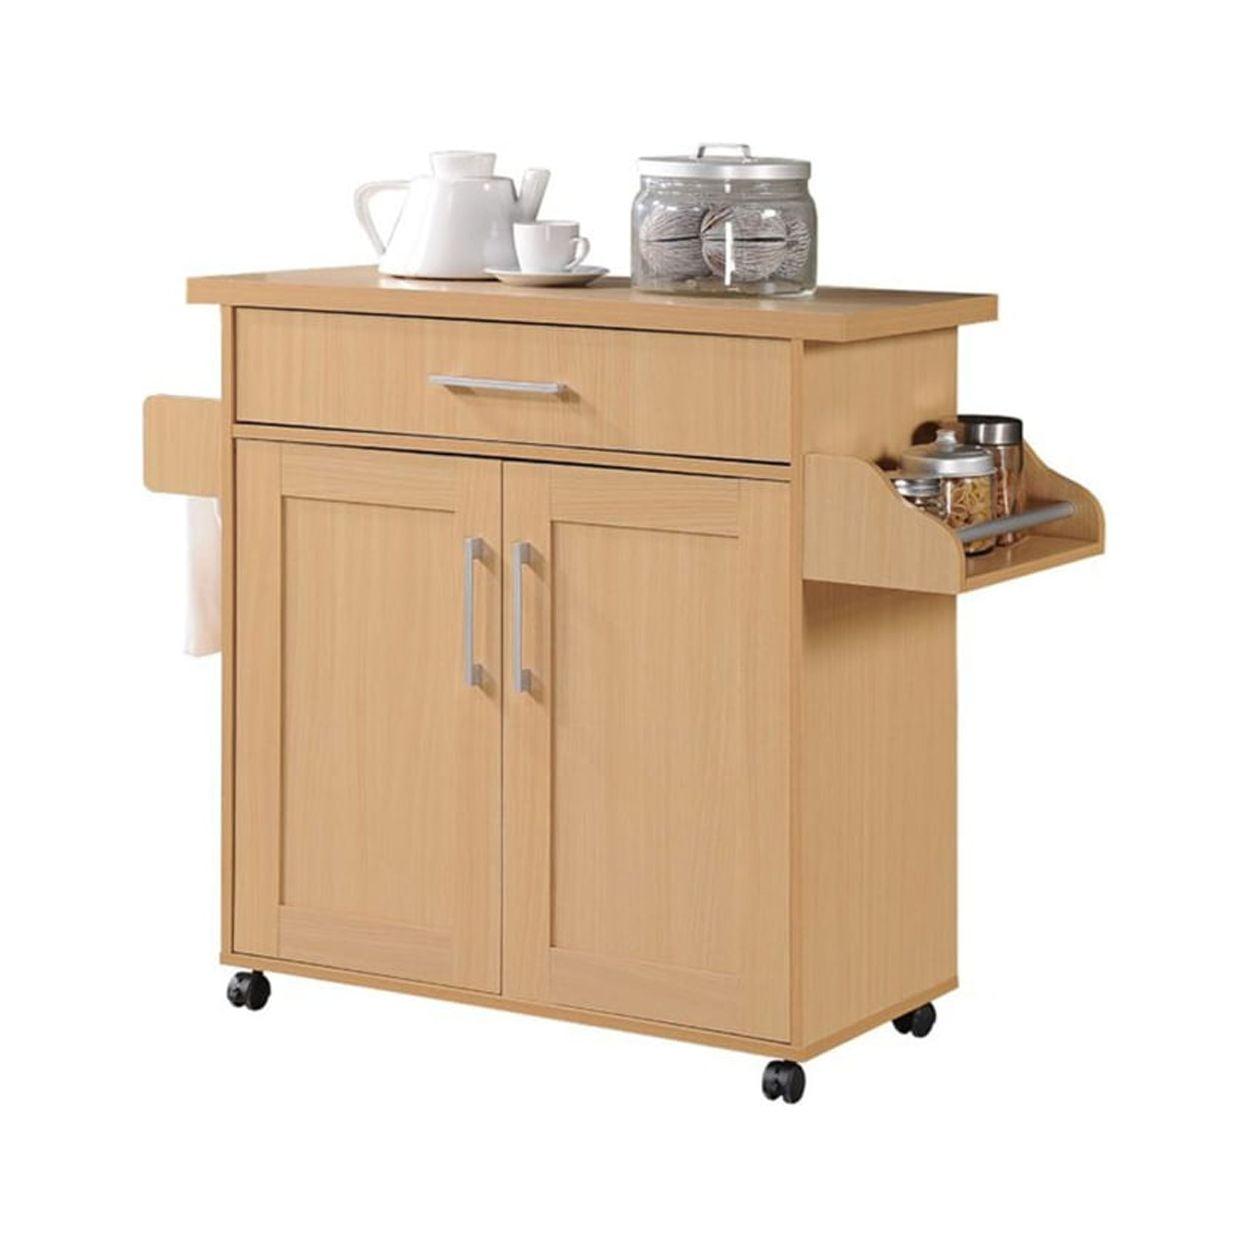 Elegant Chocolate-Grey Kitchen Island with Spice Rack and Towel Holder